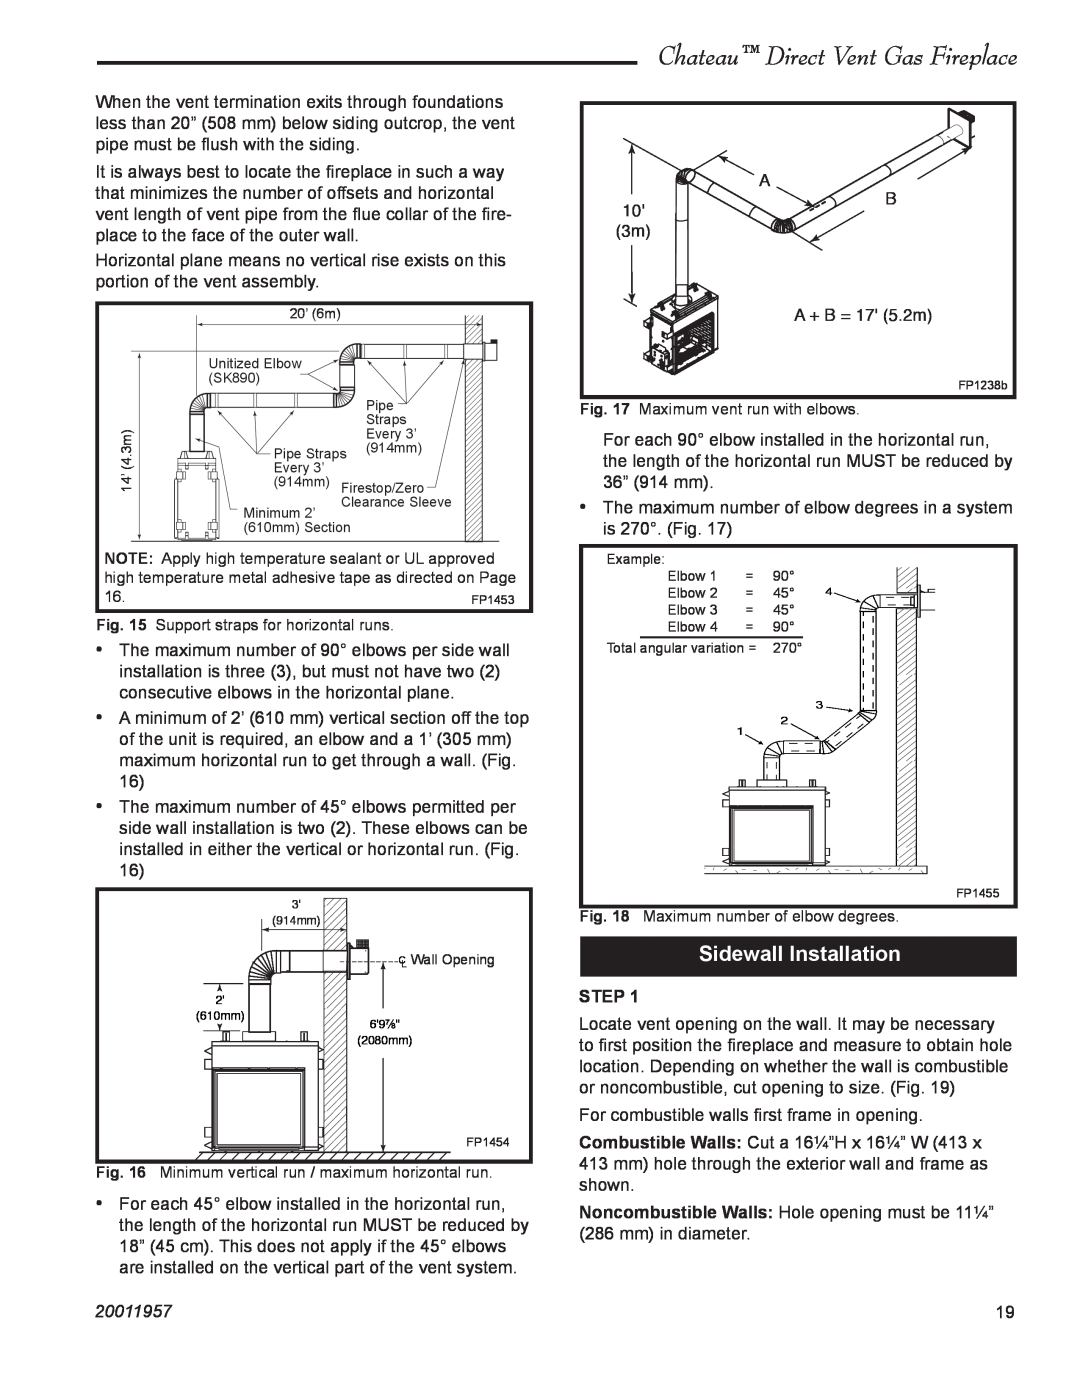 Vermont Casting DTV38s2 installation instructions Sidewall Installation, Step, Chateau Direct Vent Gas Fireplace, 20011957 